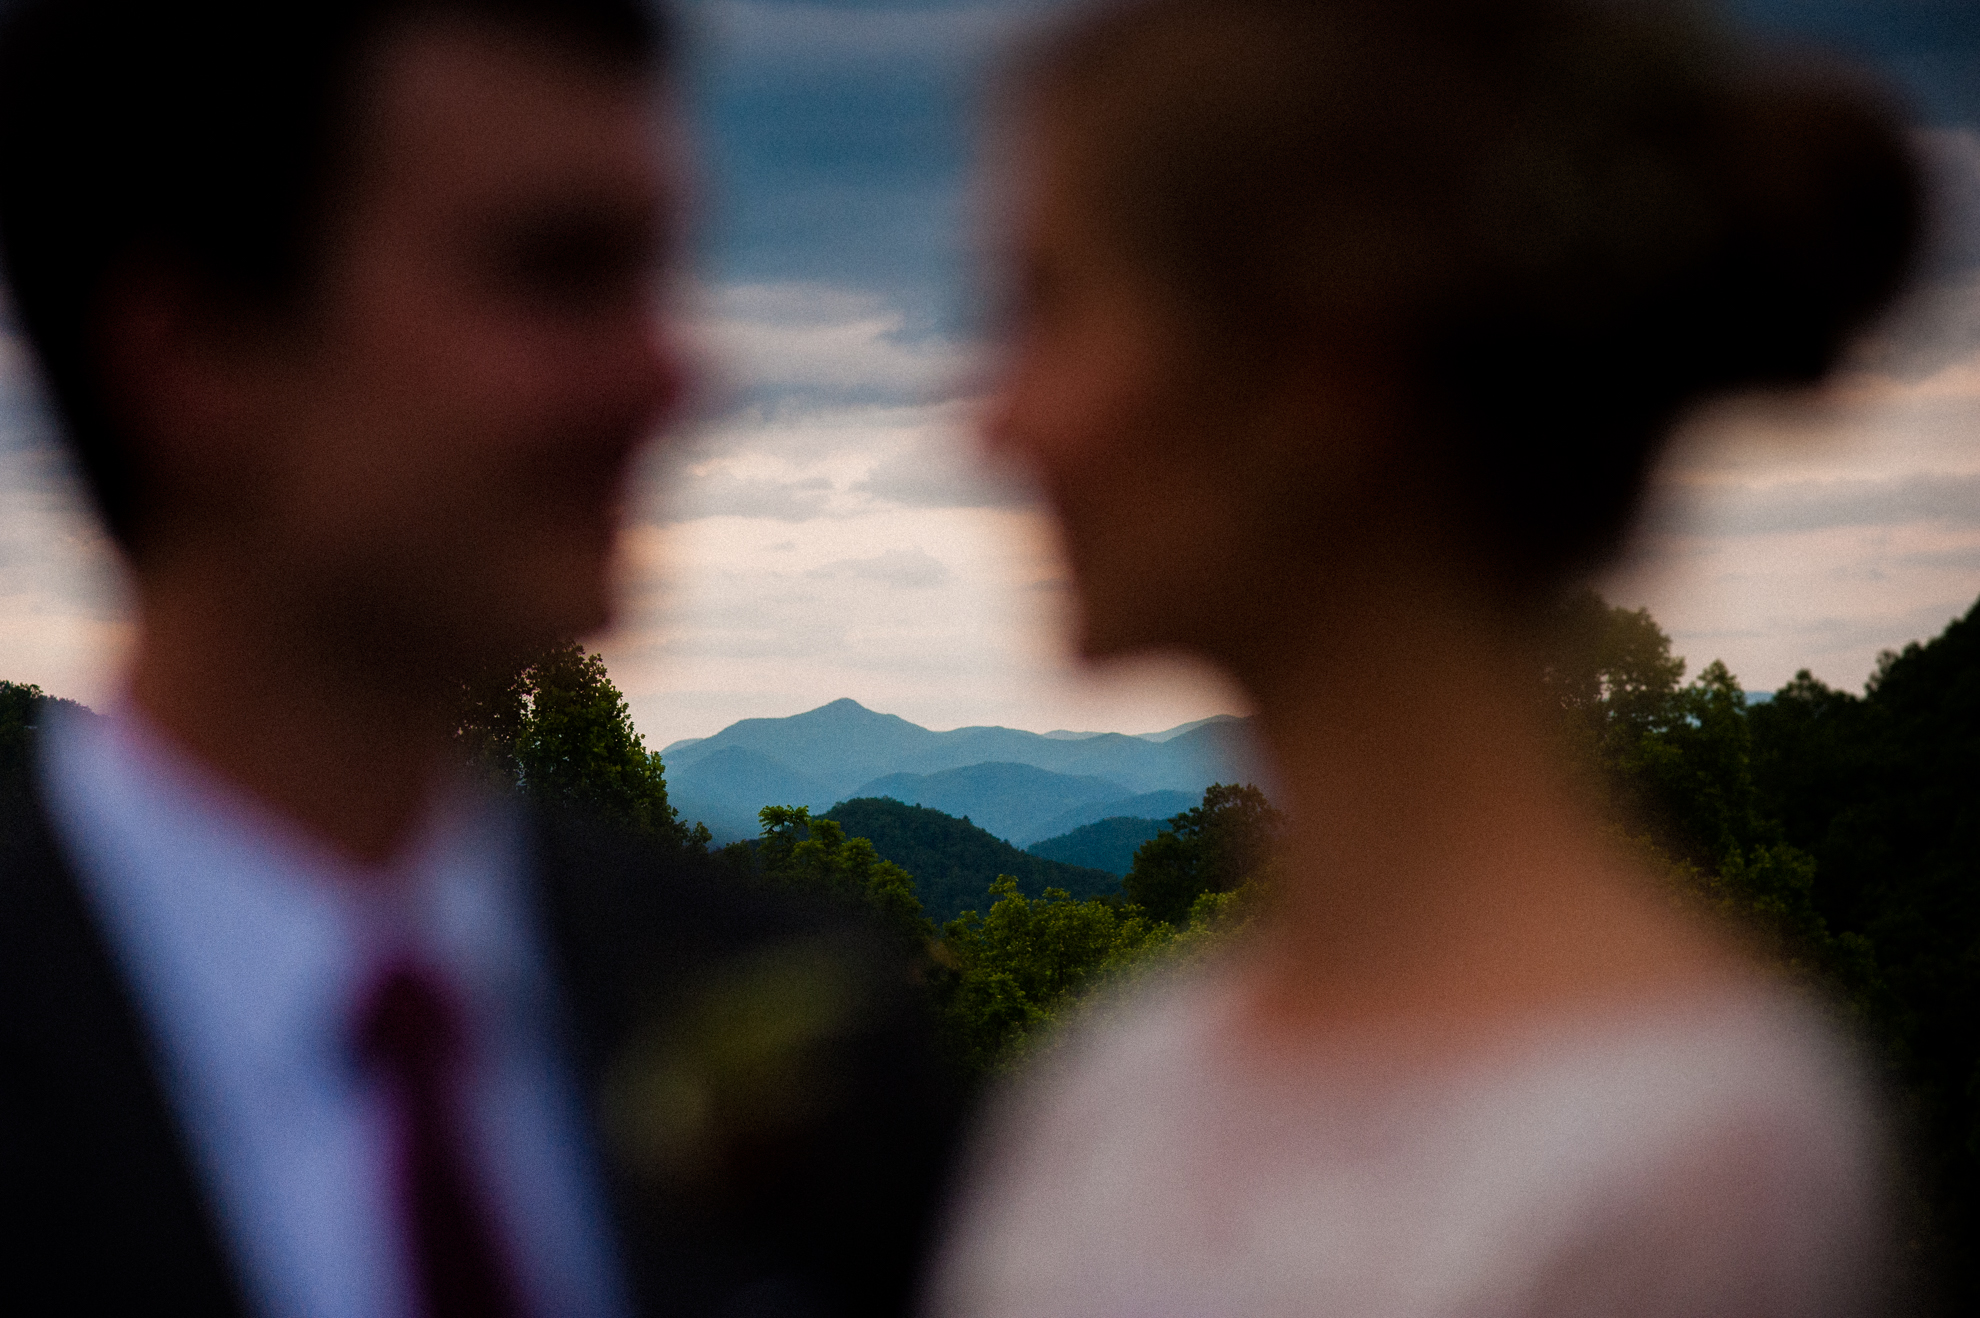 bride and groom silohuette at sunset in the mountains 